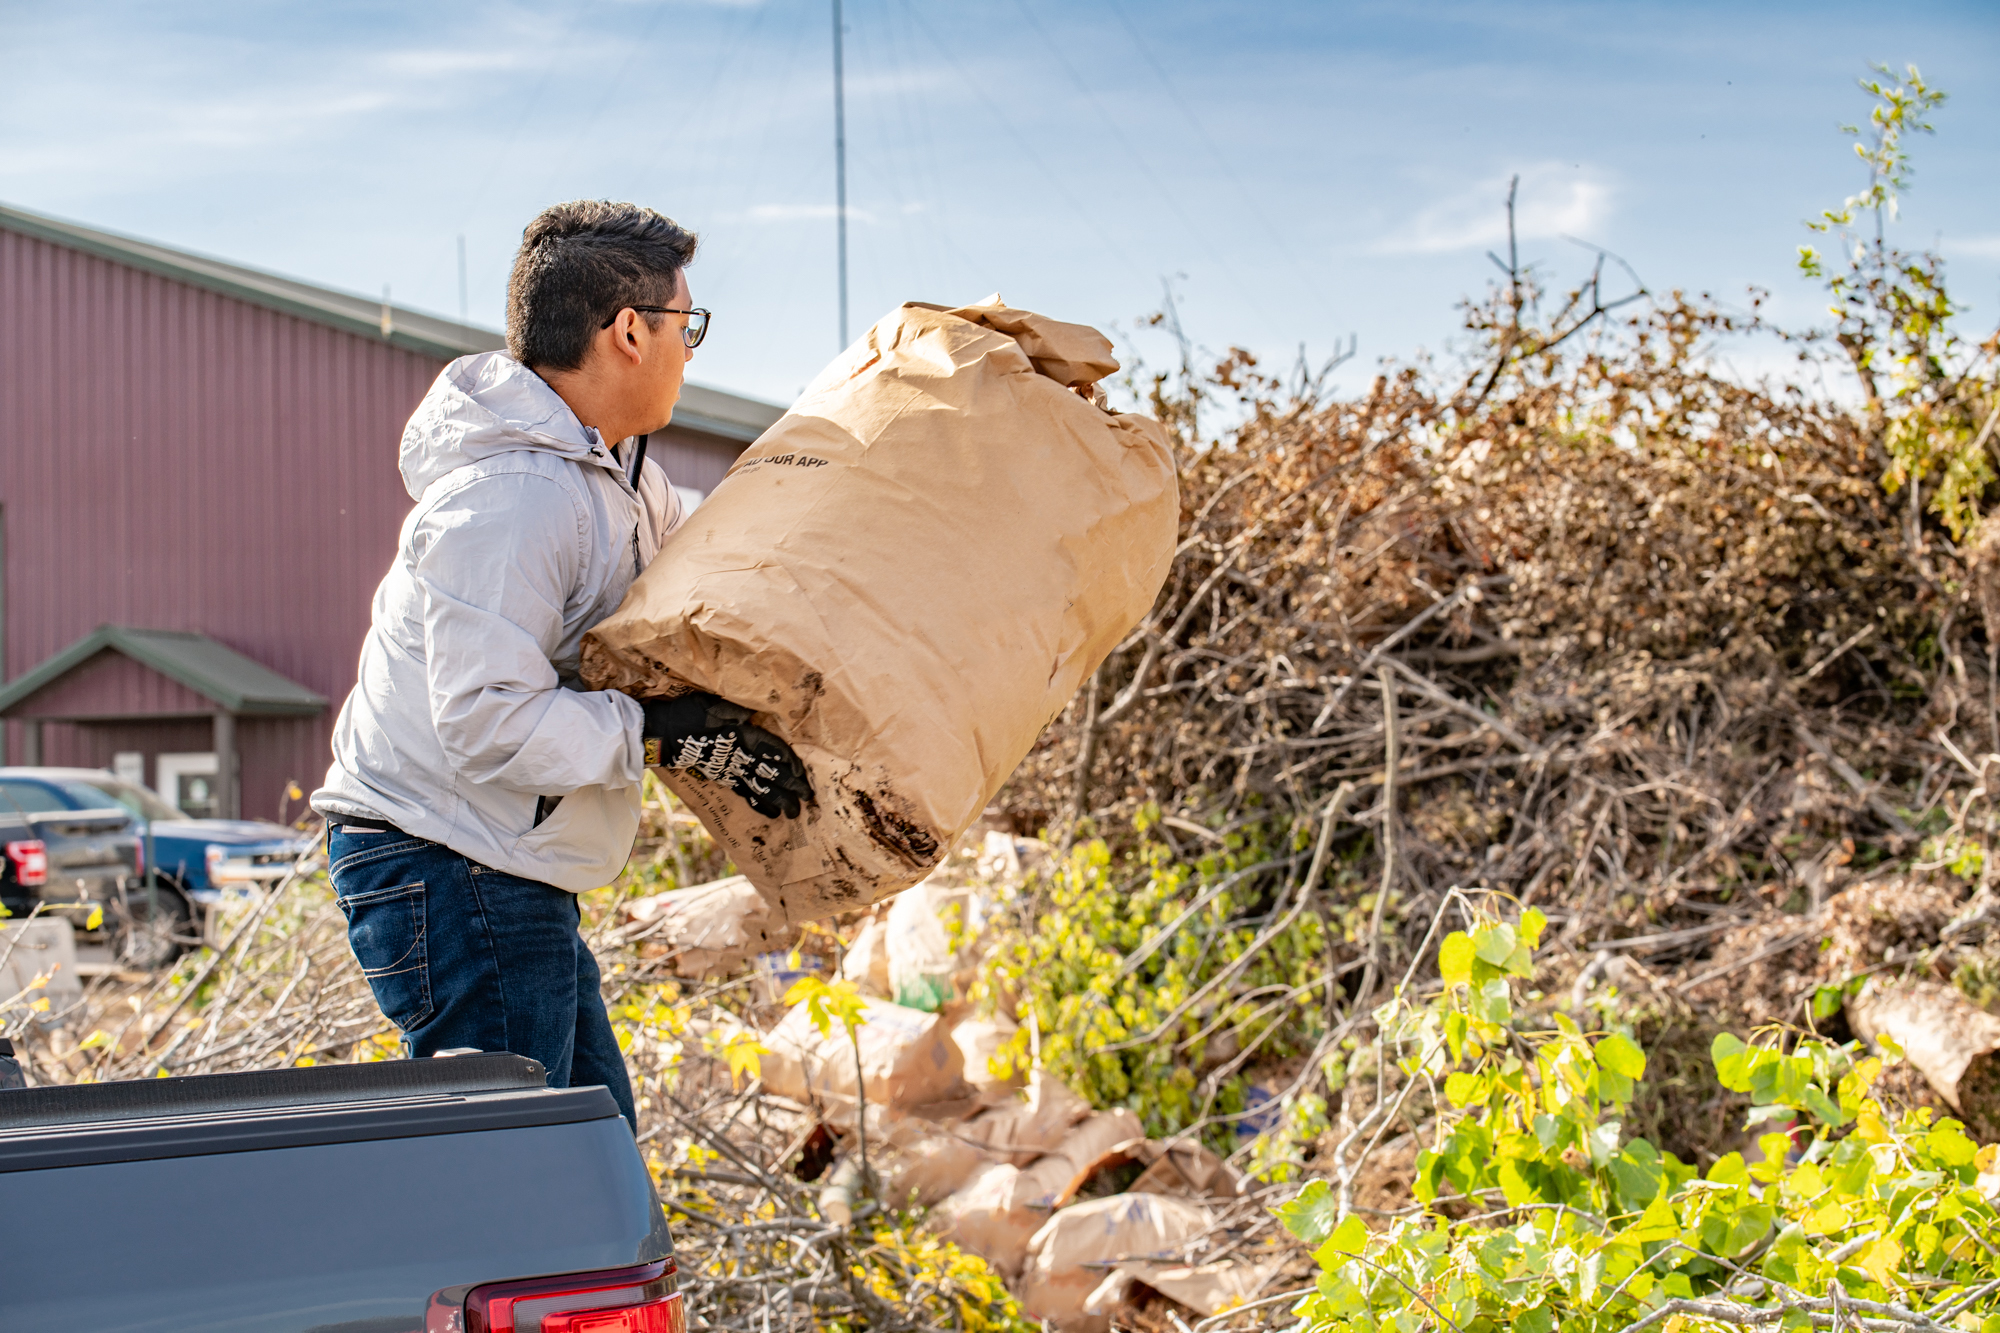 Recycle Your Yard Waste for FREE